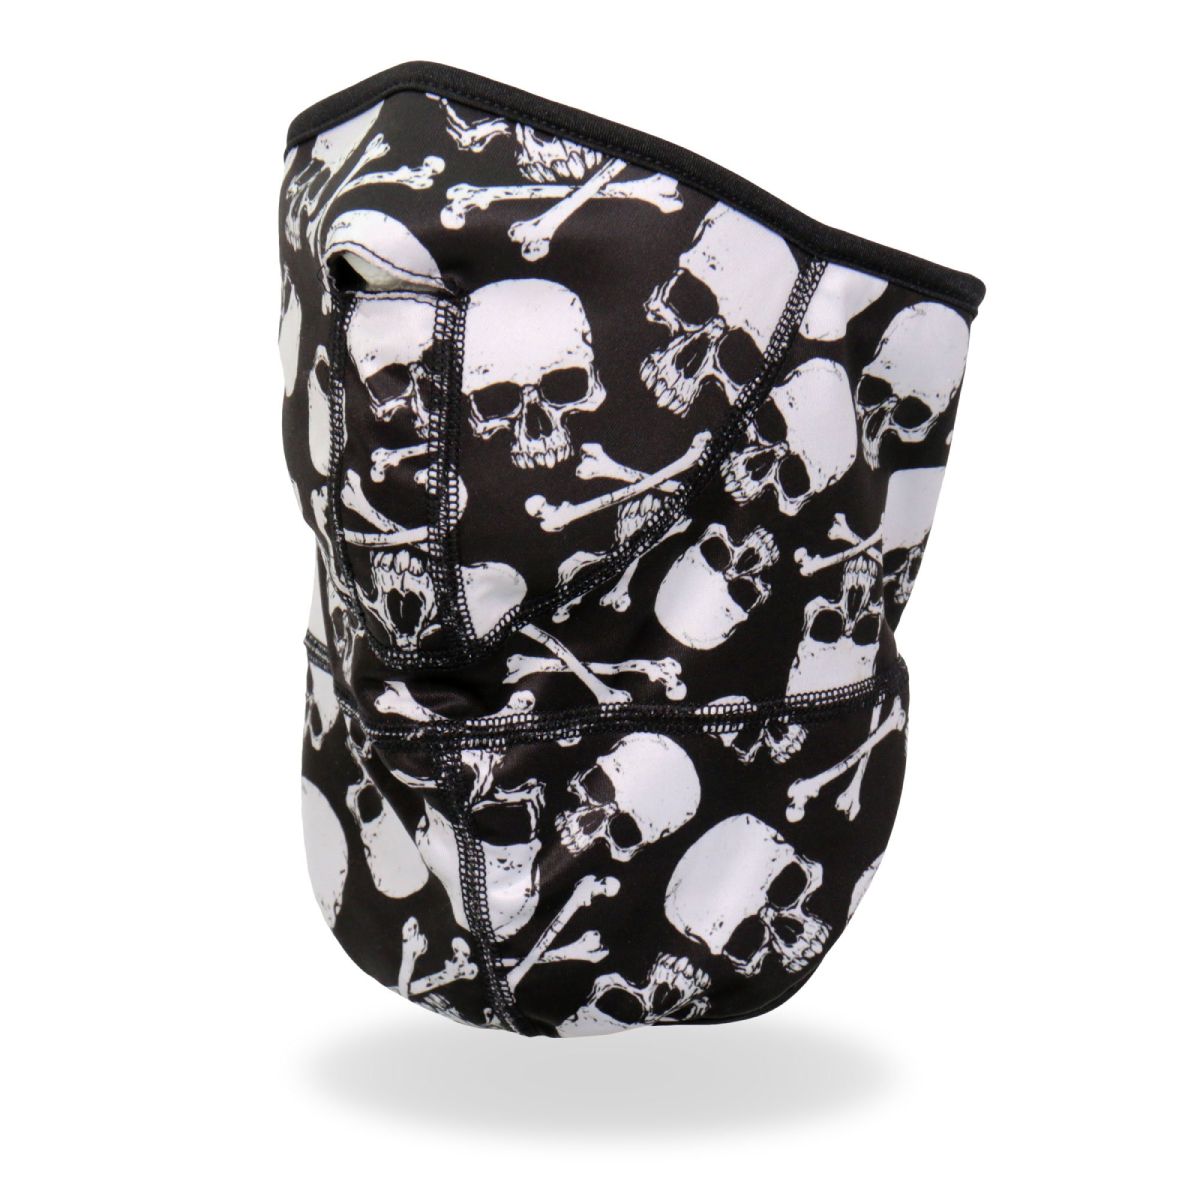 Hot Leathers FWC2003 Skull and Crossbones Face Wrap Neck Warmer